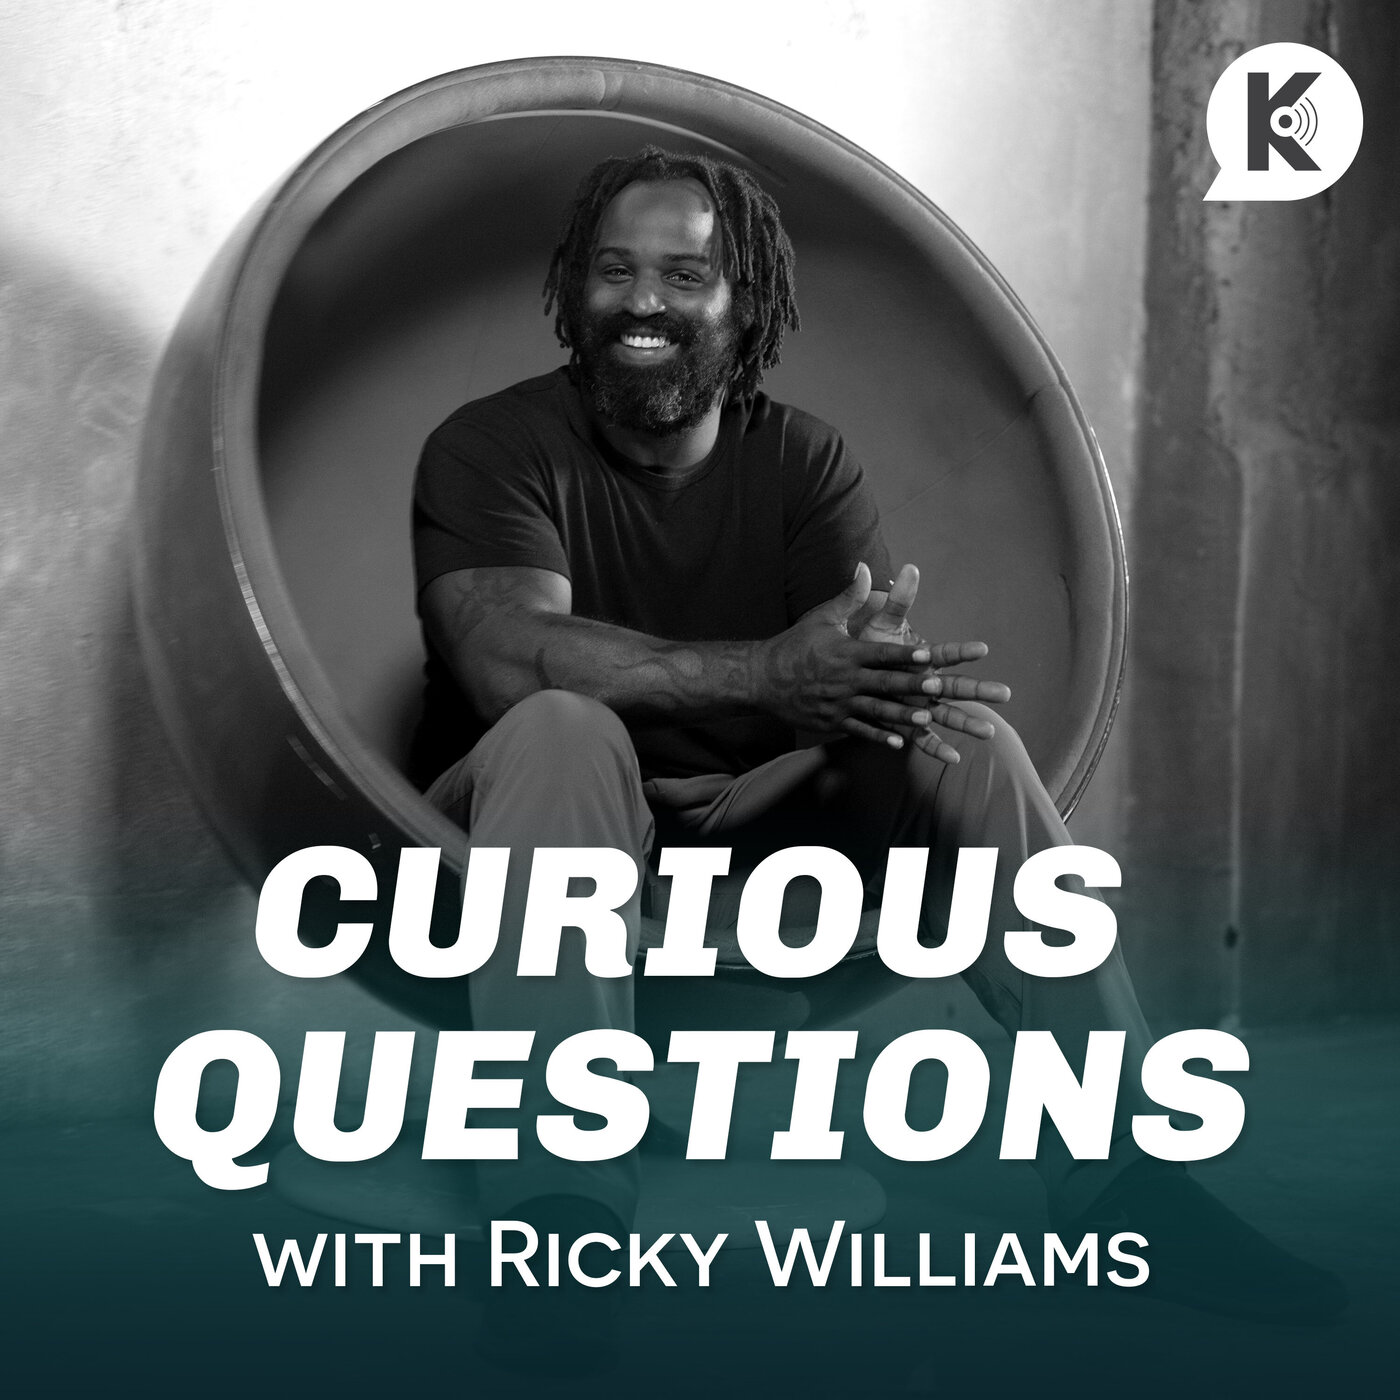 E21 Tucky Blunts Discusses the Mentality of a Capricorn | Ep. 21 | Curious Questions with Ricky Williams